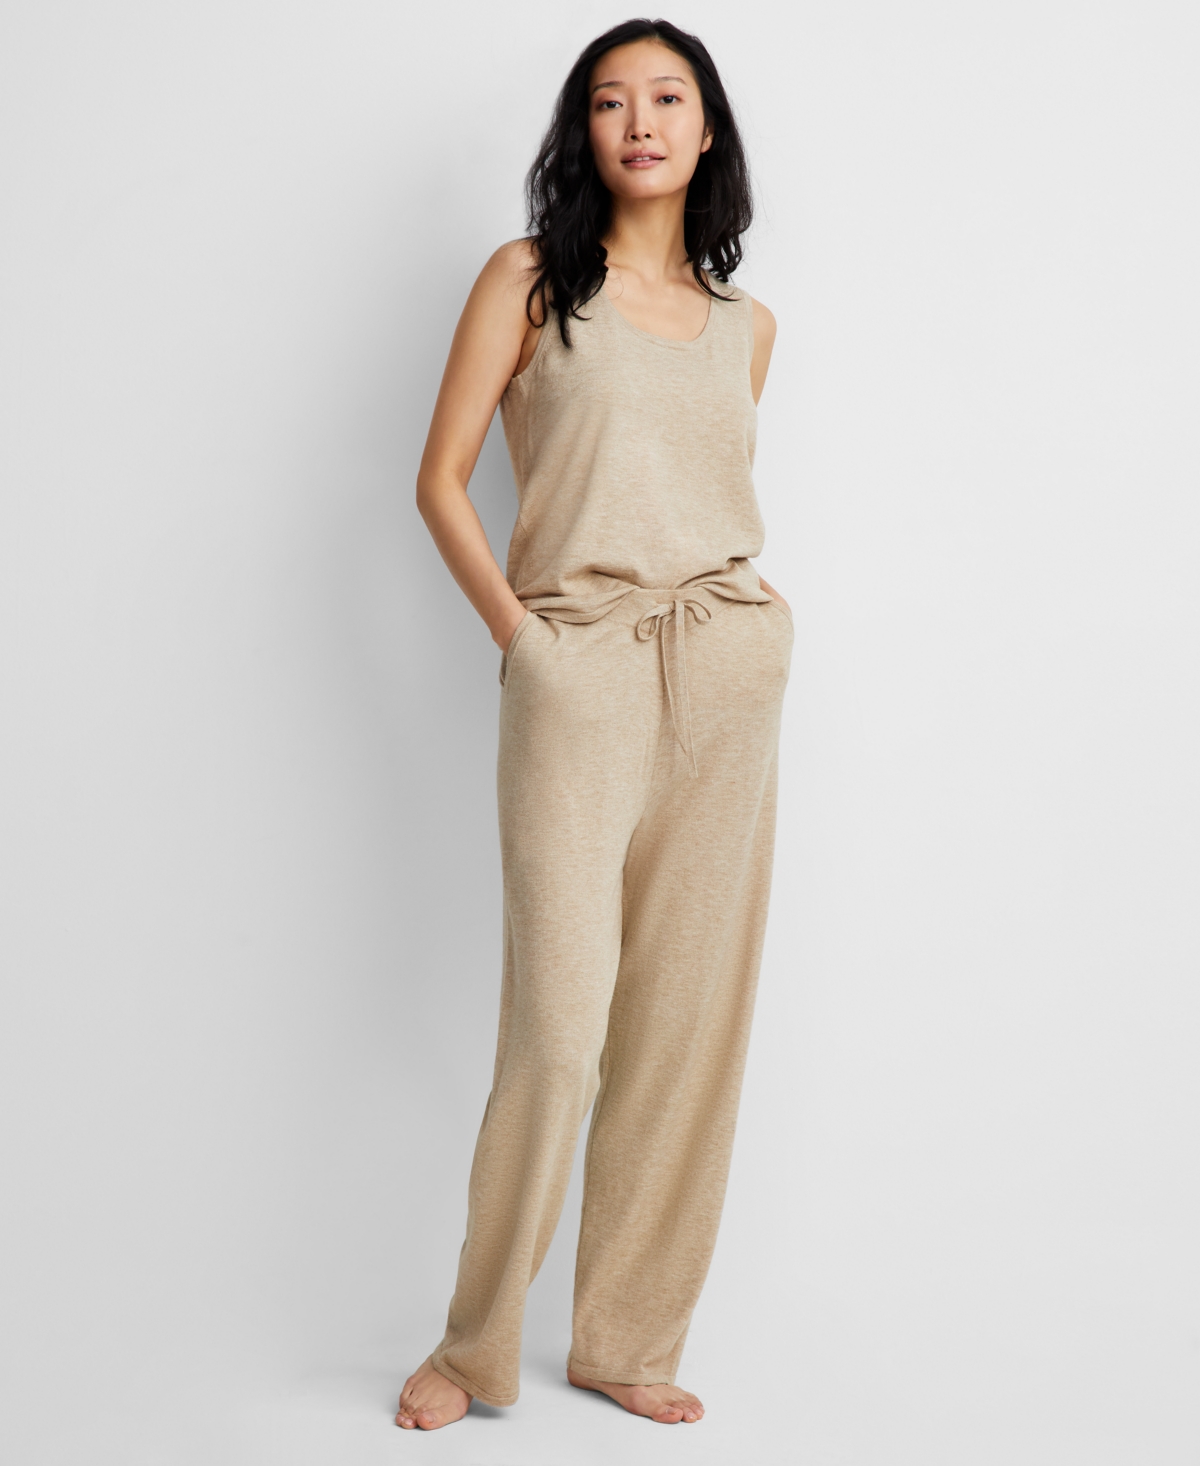 State Of Day Women's 2-pc. Sweater Knit Loungewear Pant Set, Created For Macy's In Toasted Peanut